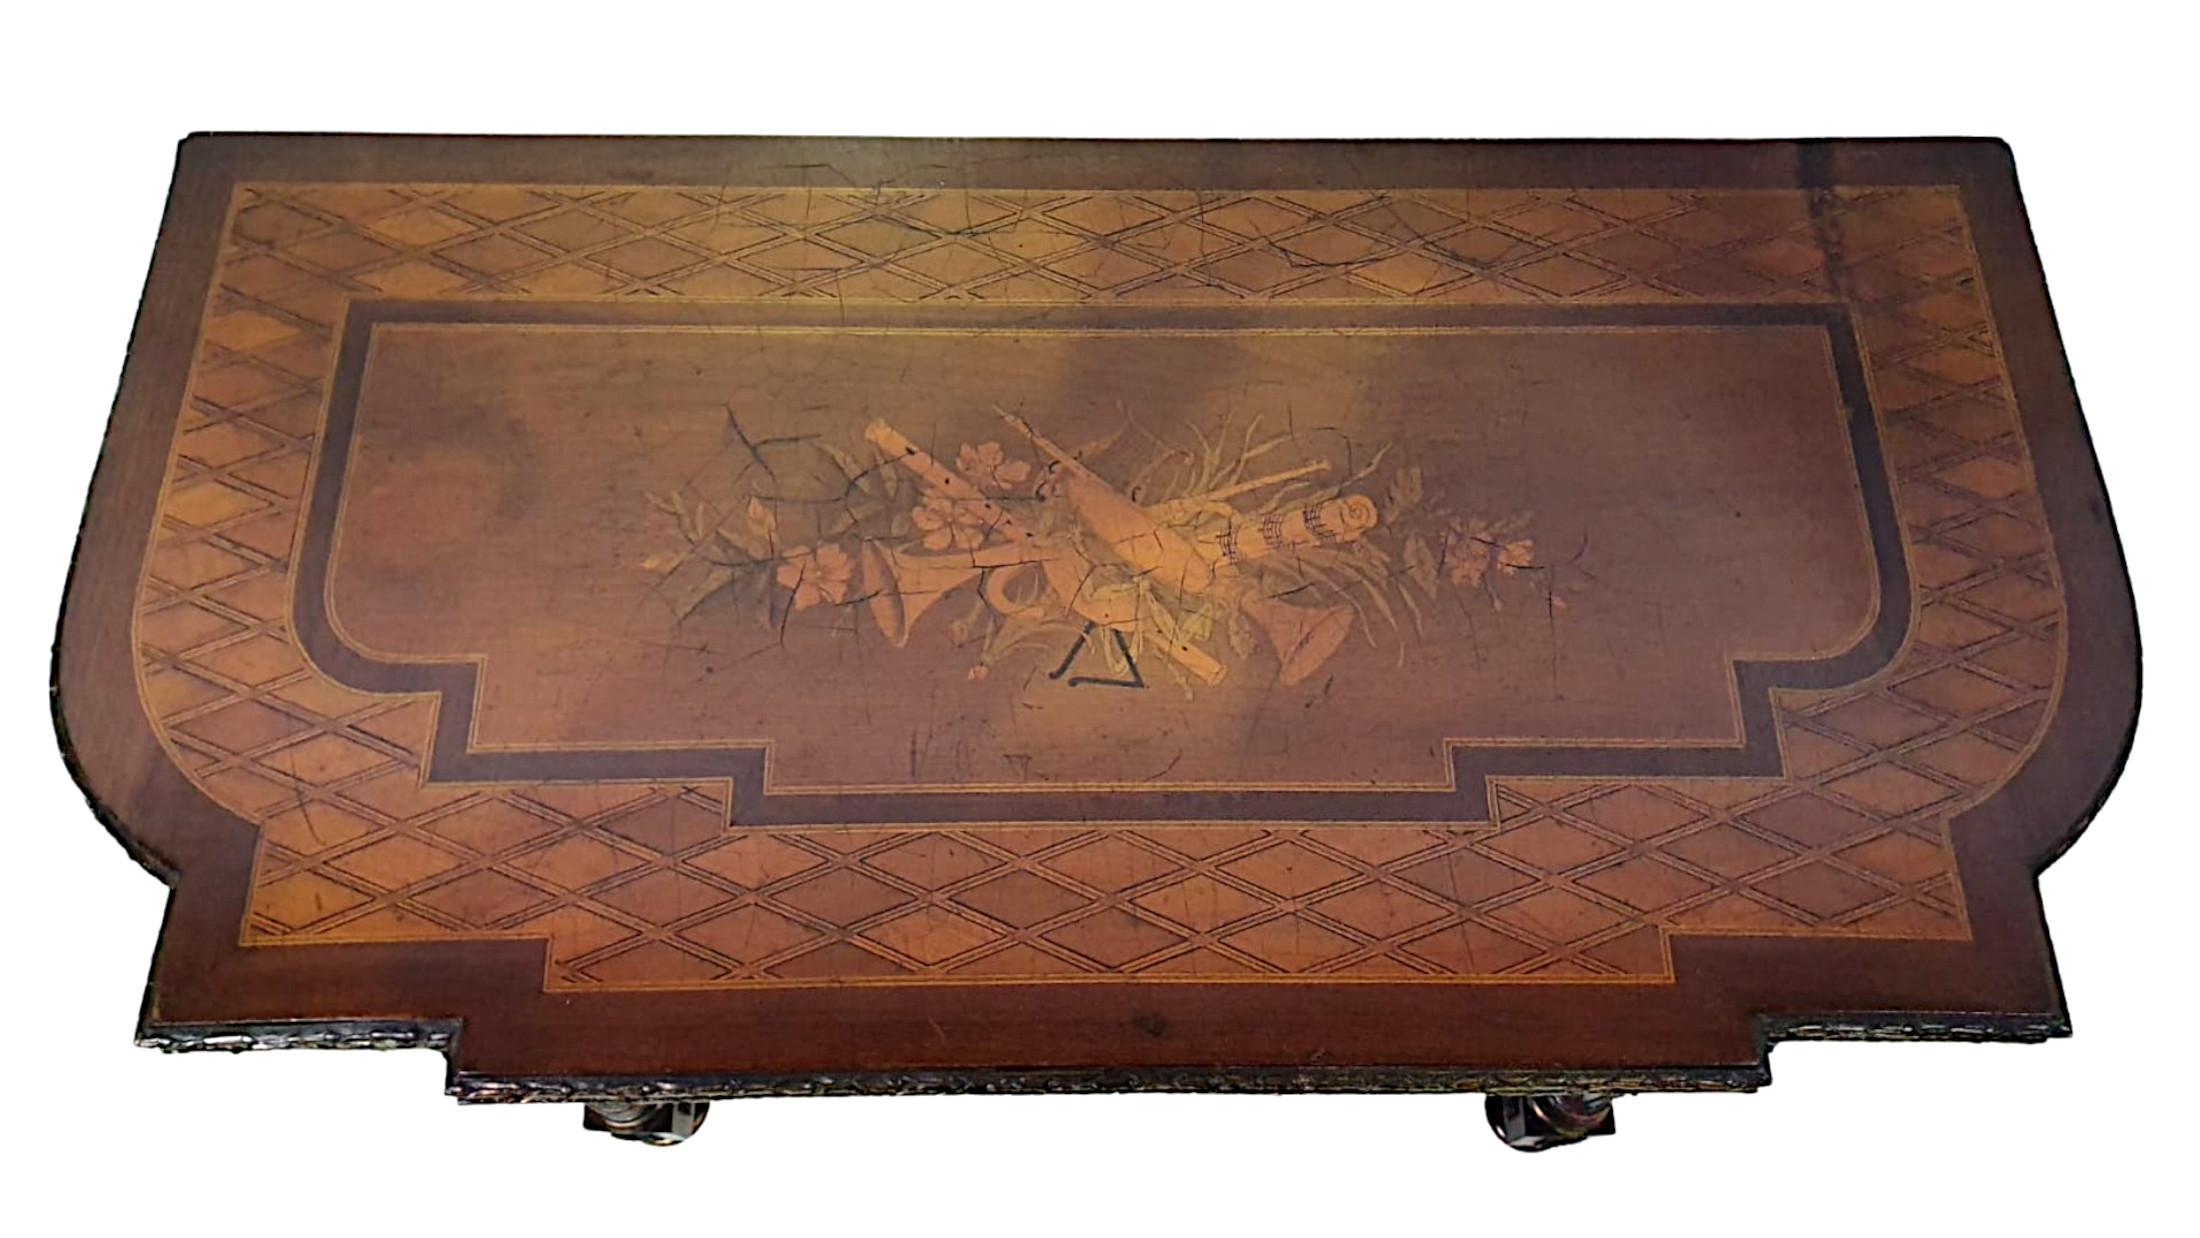 A rare museum quality 19th century marquetry inlaid turn over leaf card table with ormolu mounts thoughout. The shaped and moulded top of rectangular form with intricate marquetry inlay centred with a cartouche depicting musical instruments and